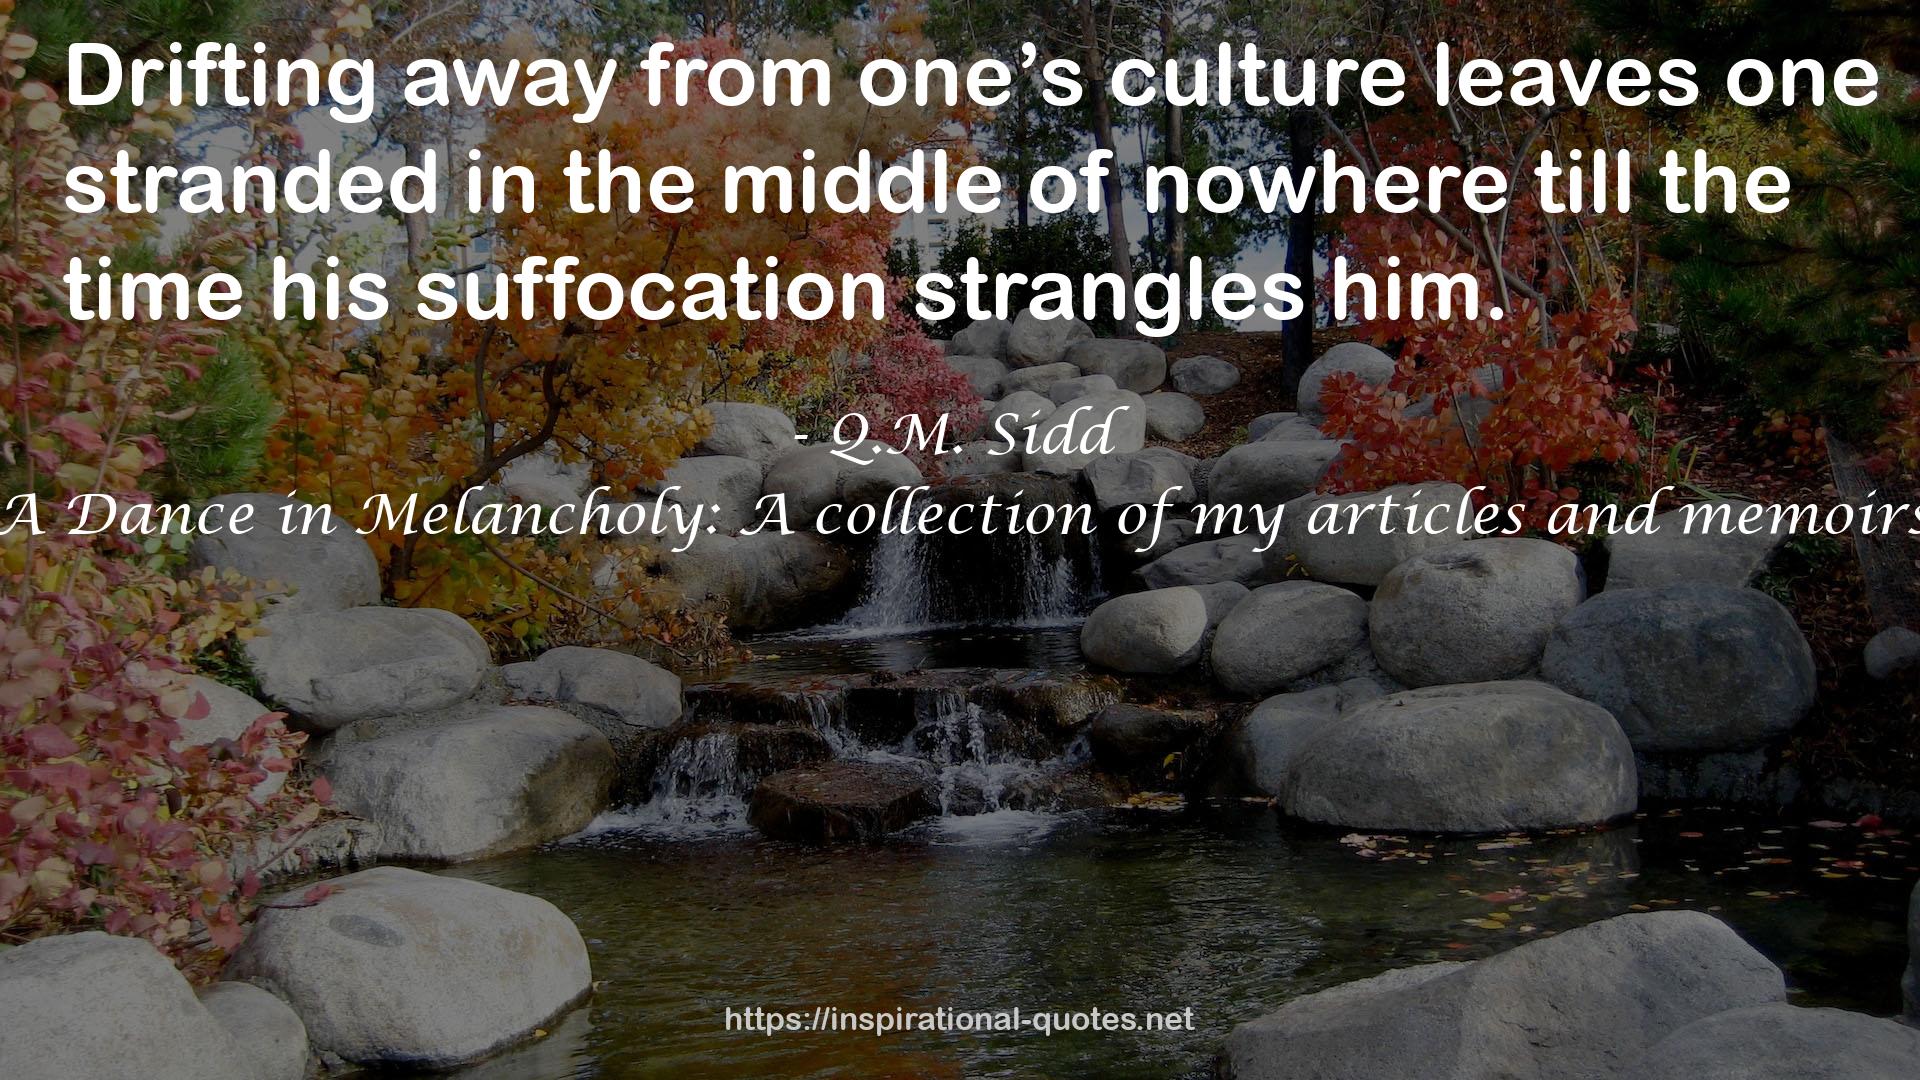 A Dance in Melancholy: A collection of my articles and memoirs QUOTES